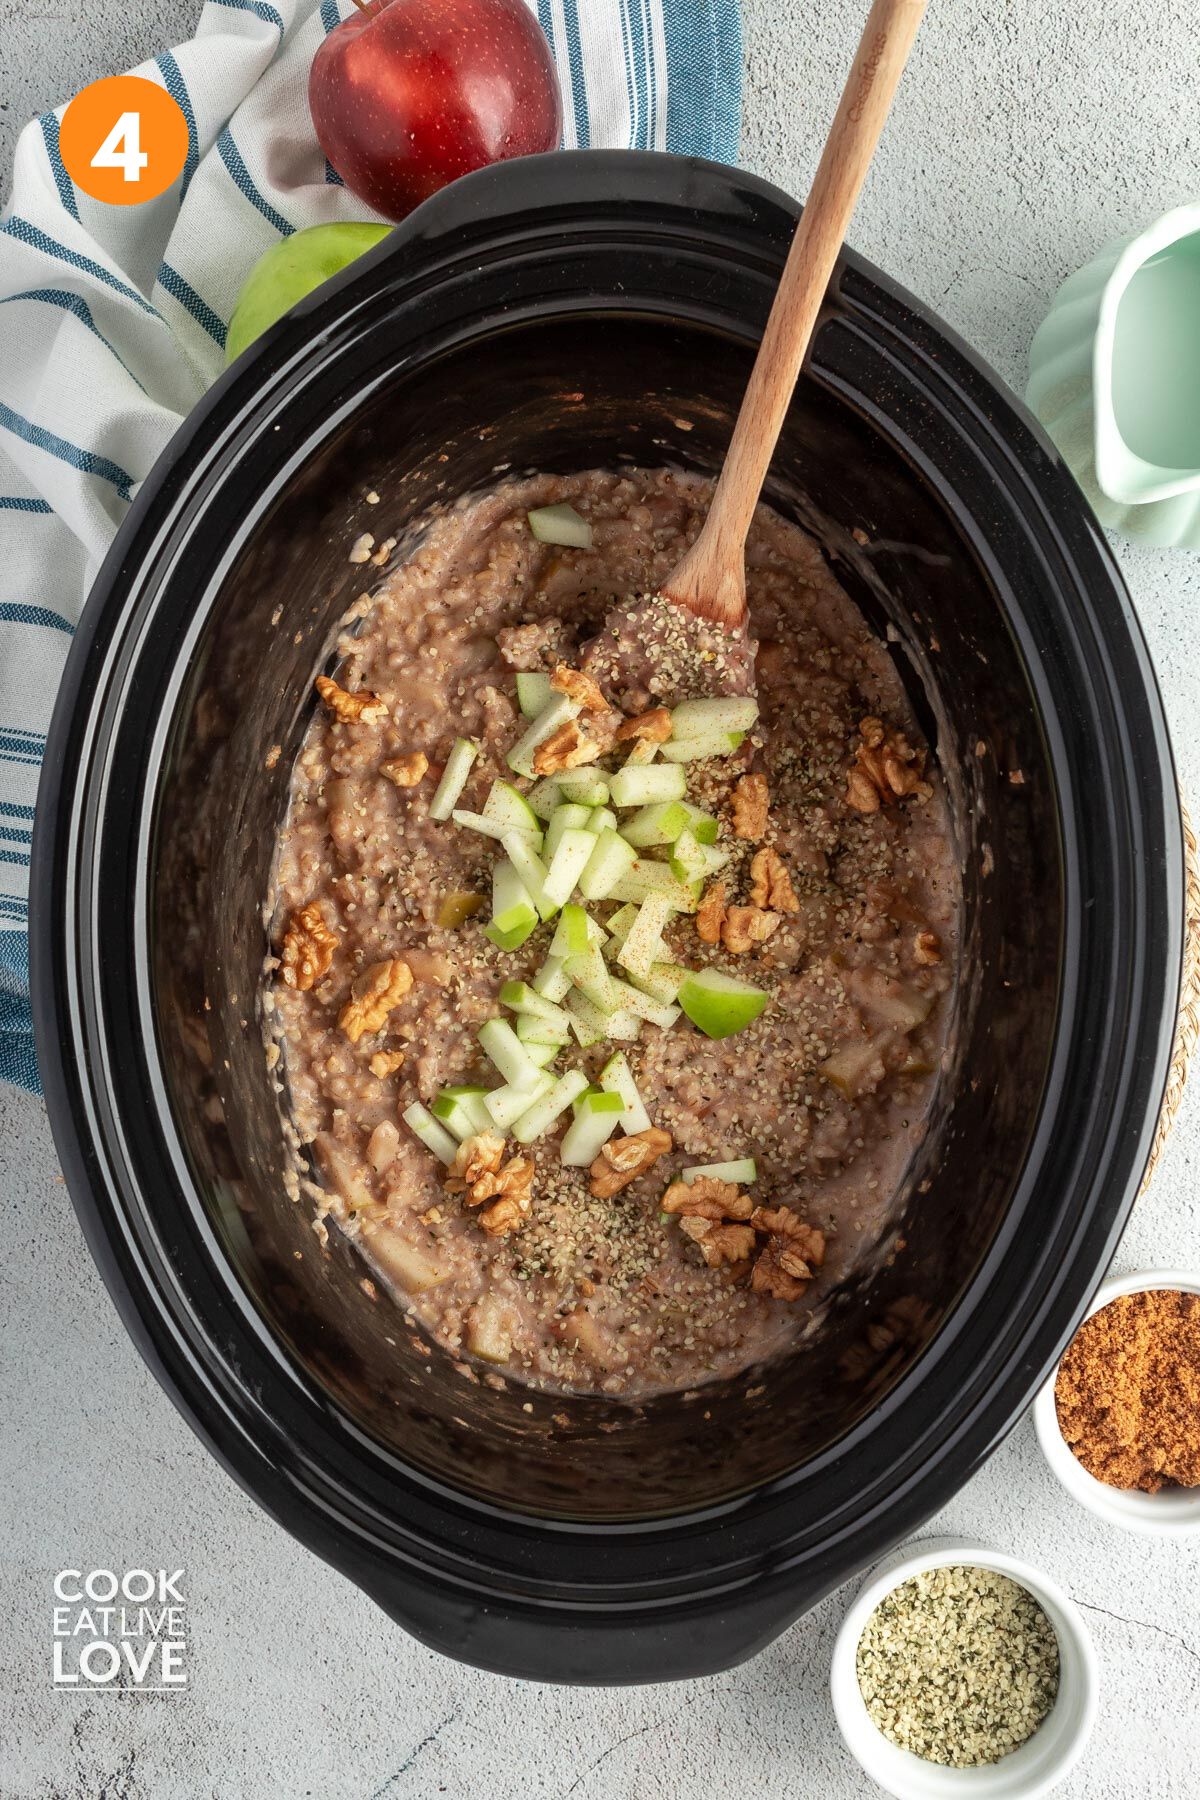 Apple oatmeal cooked in the slow cooker and garnished with diced apples and walnuts.